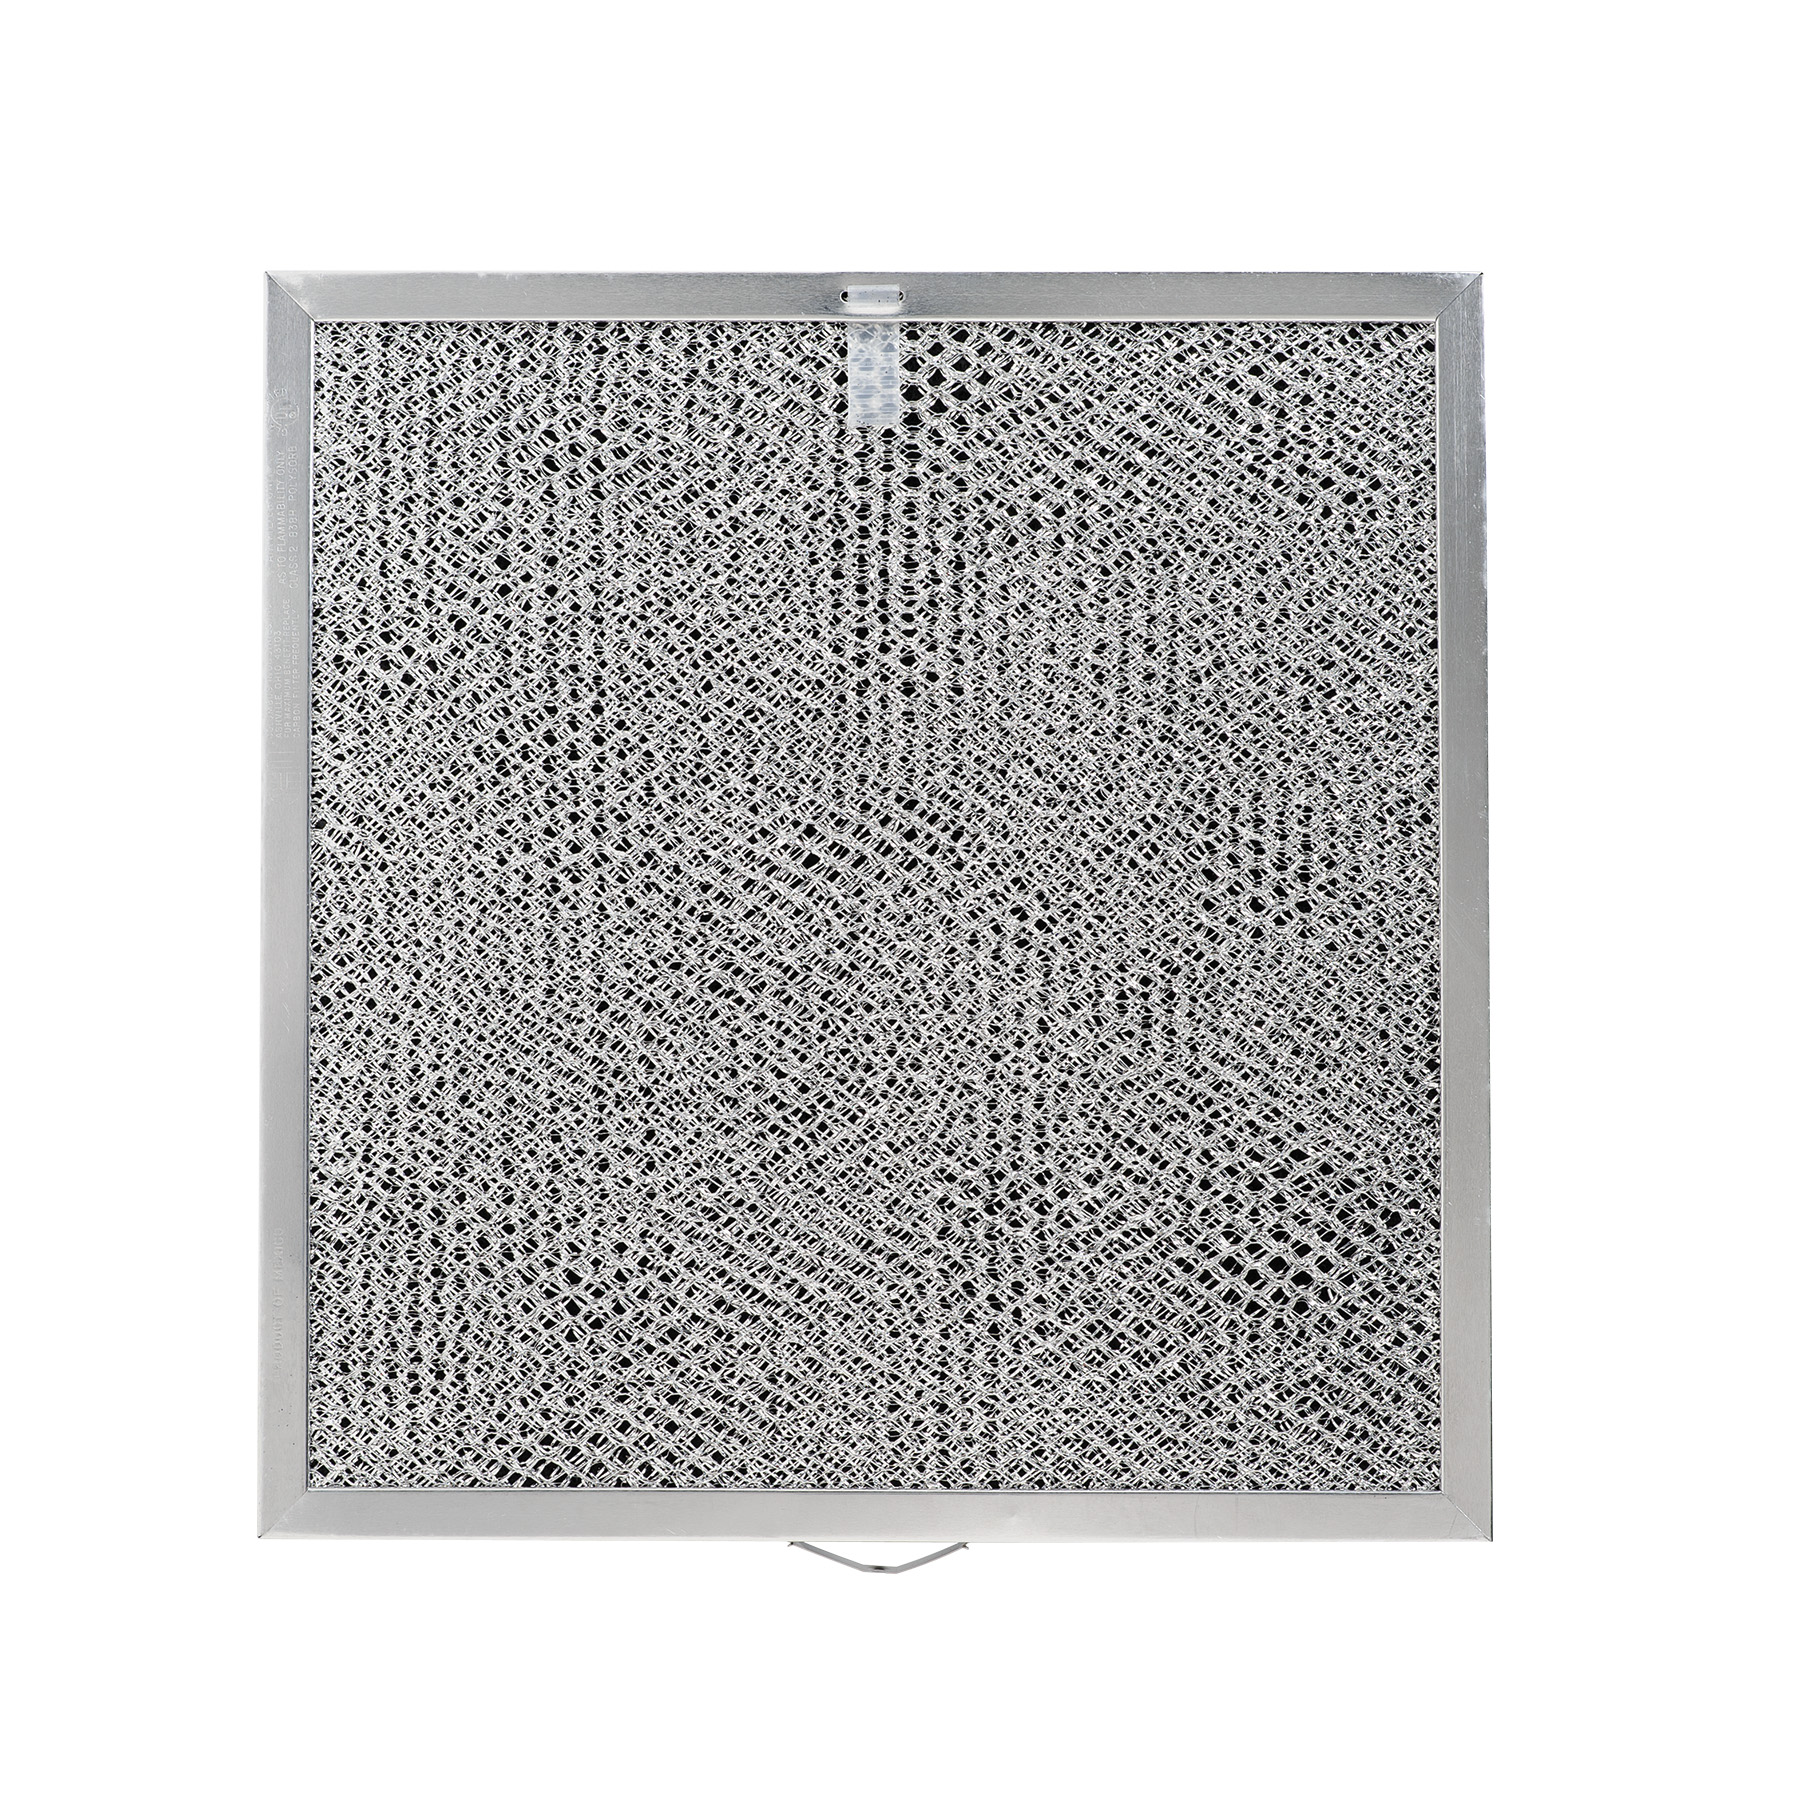 Broan-NuTone® Genuine Replacement Charcoal Filter for Range Hoods, 11-5/8" x 11-1/4", Fits Select Models